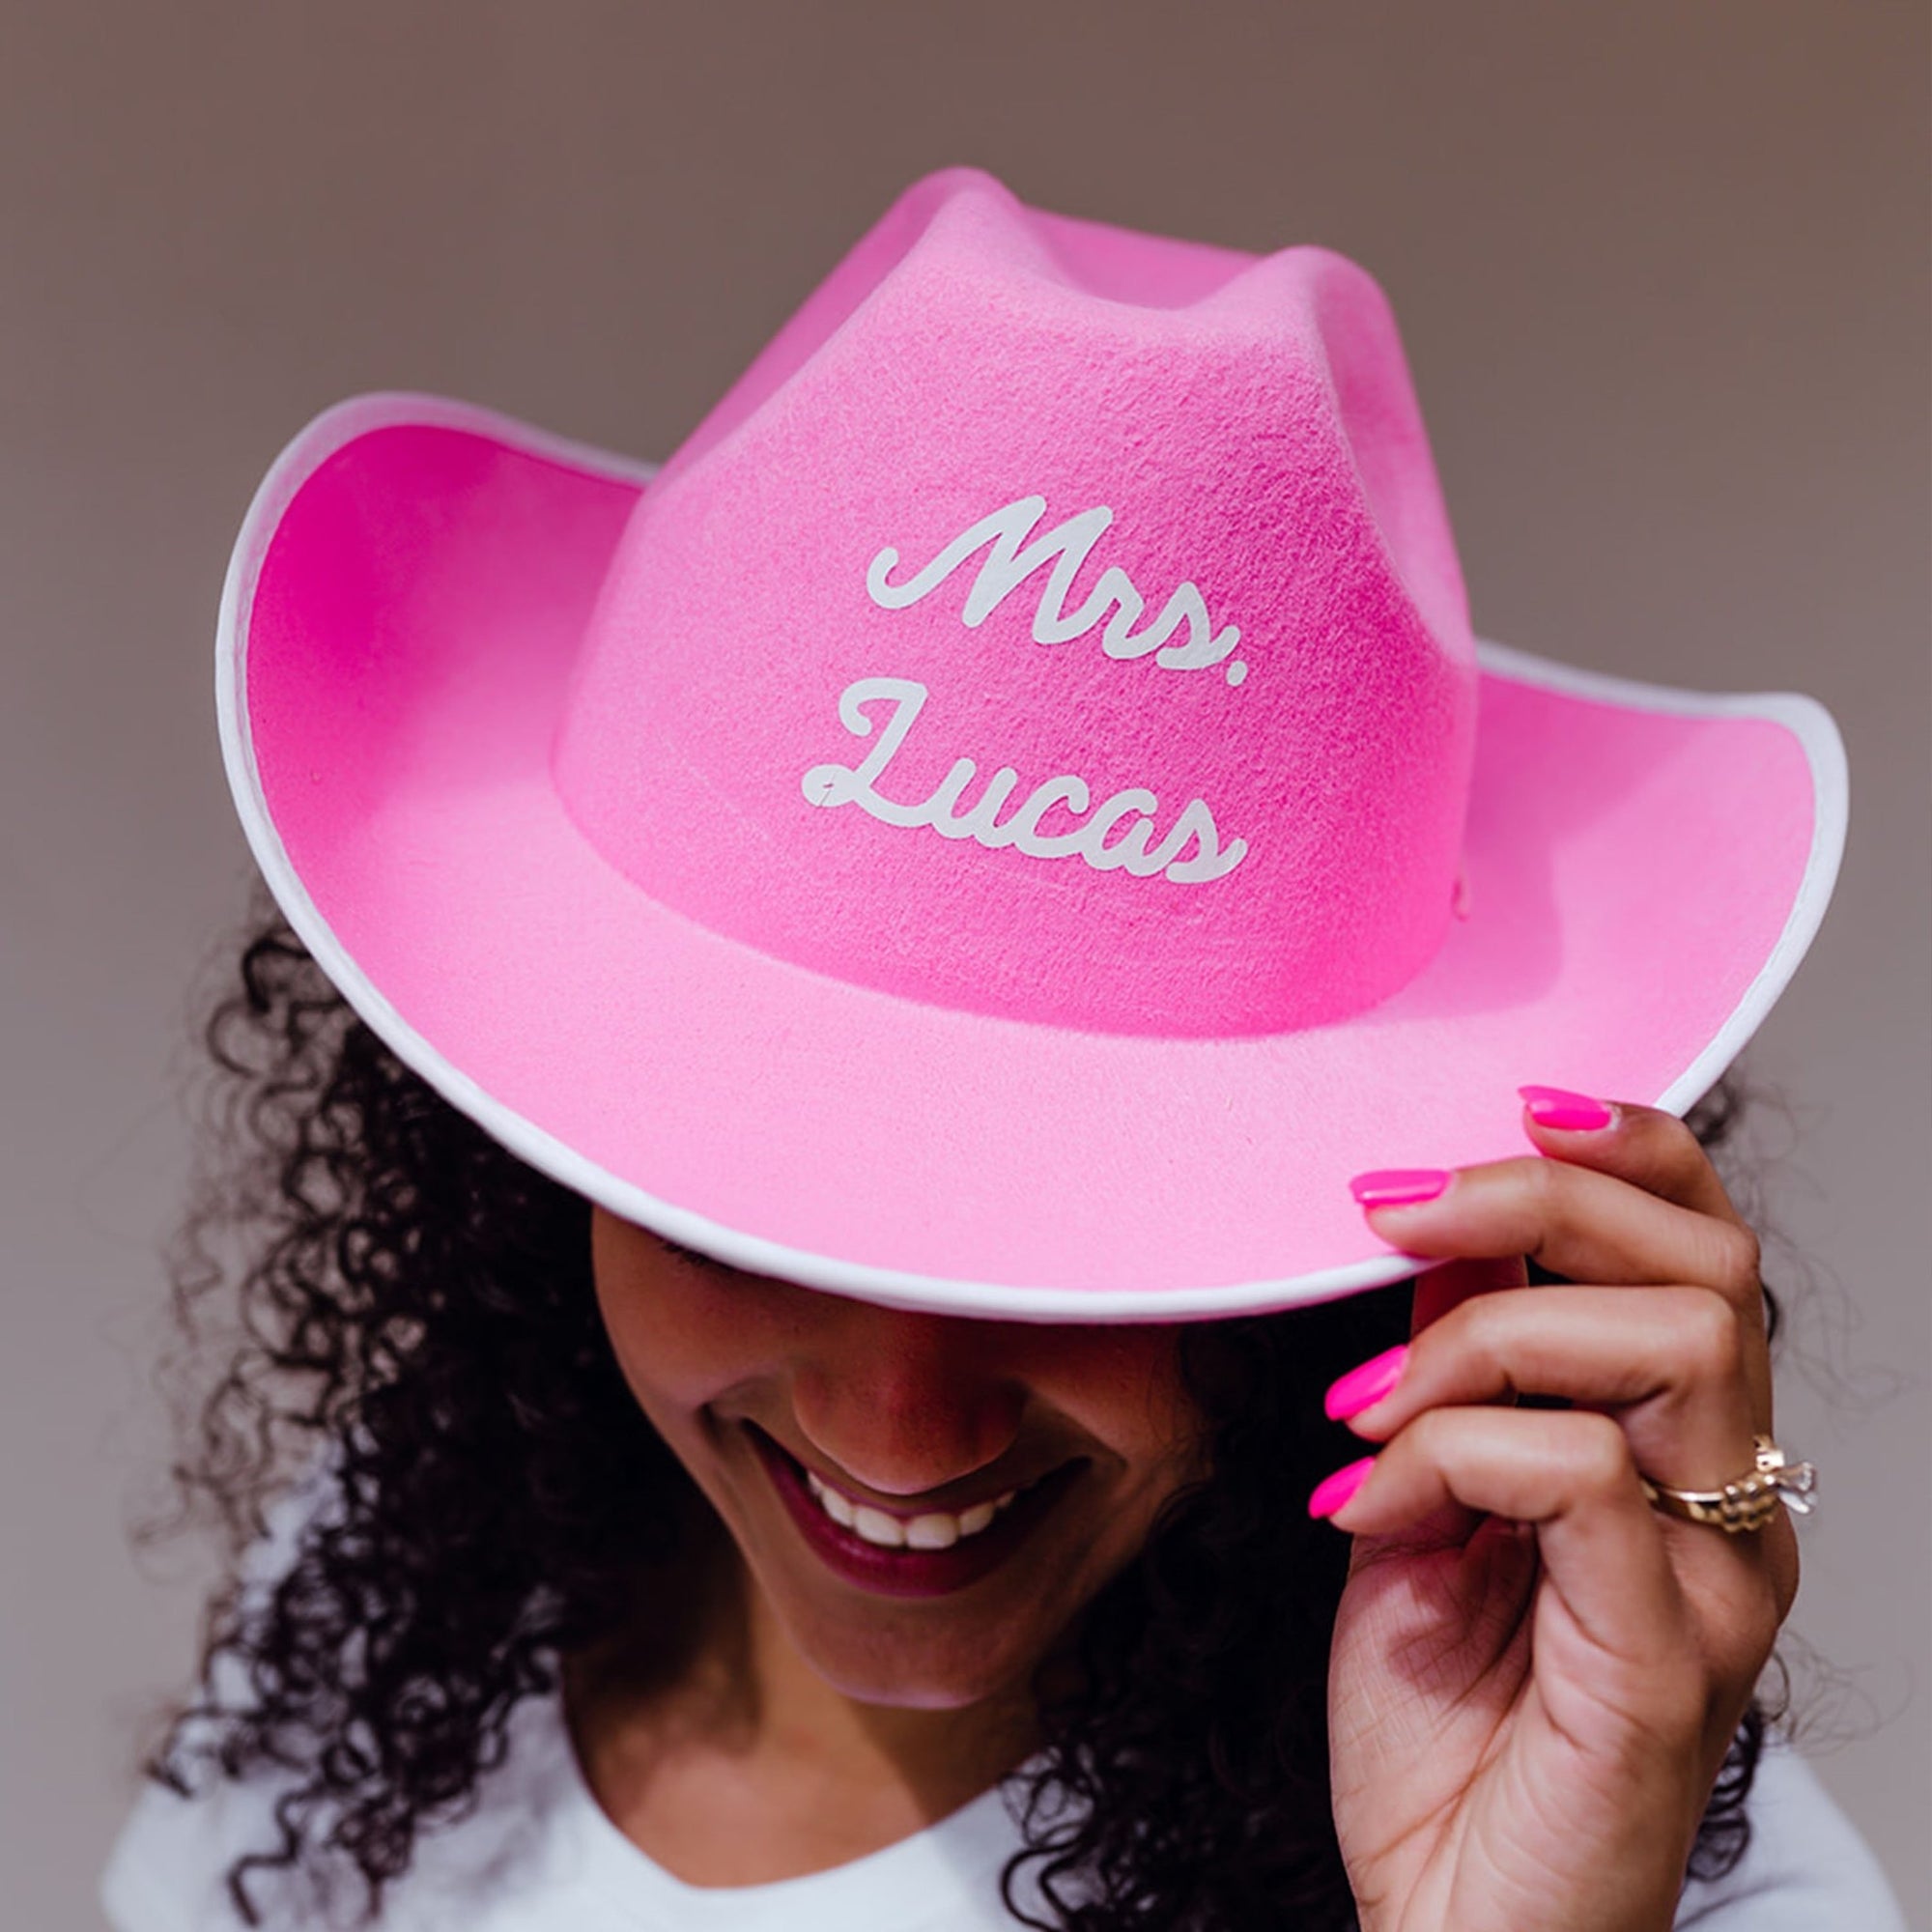 A pink cowboy hat is customized with white font which reads "Mrs. Johnson".